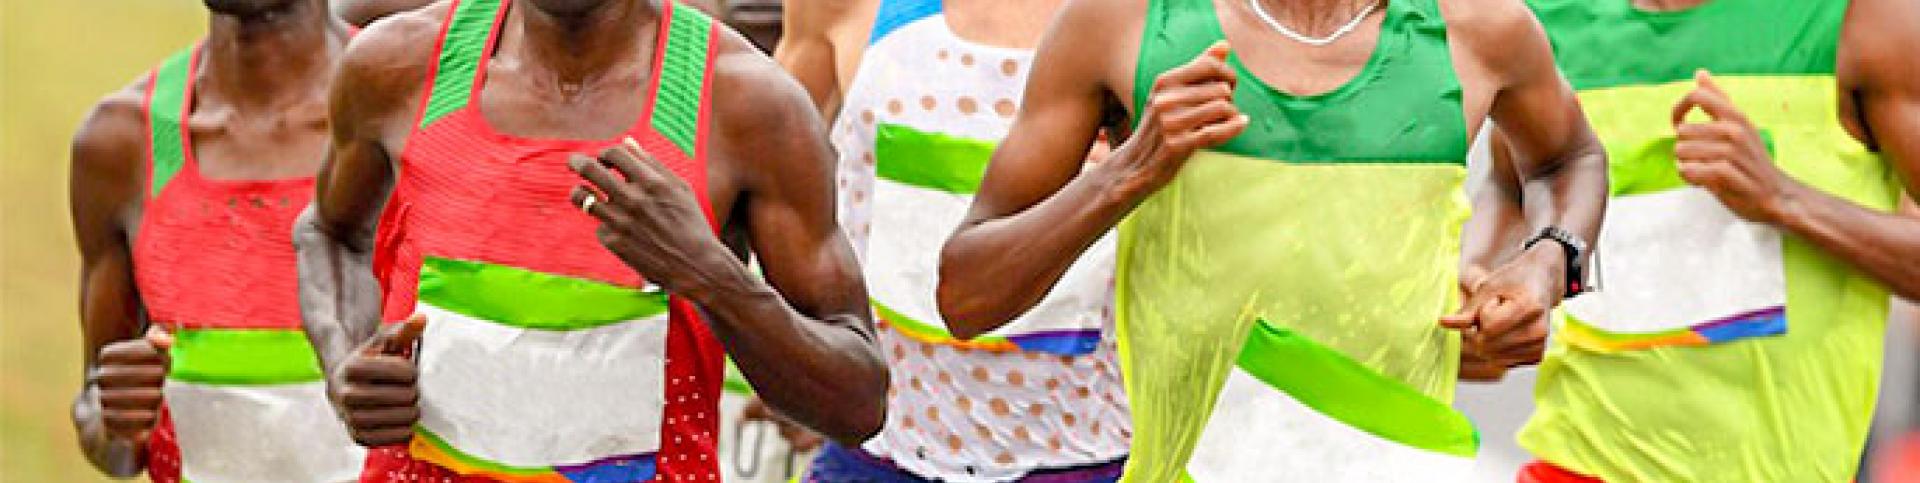 Athletes running together during a marathon competition. 